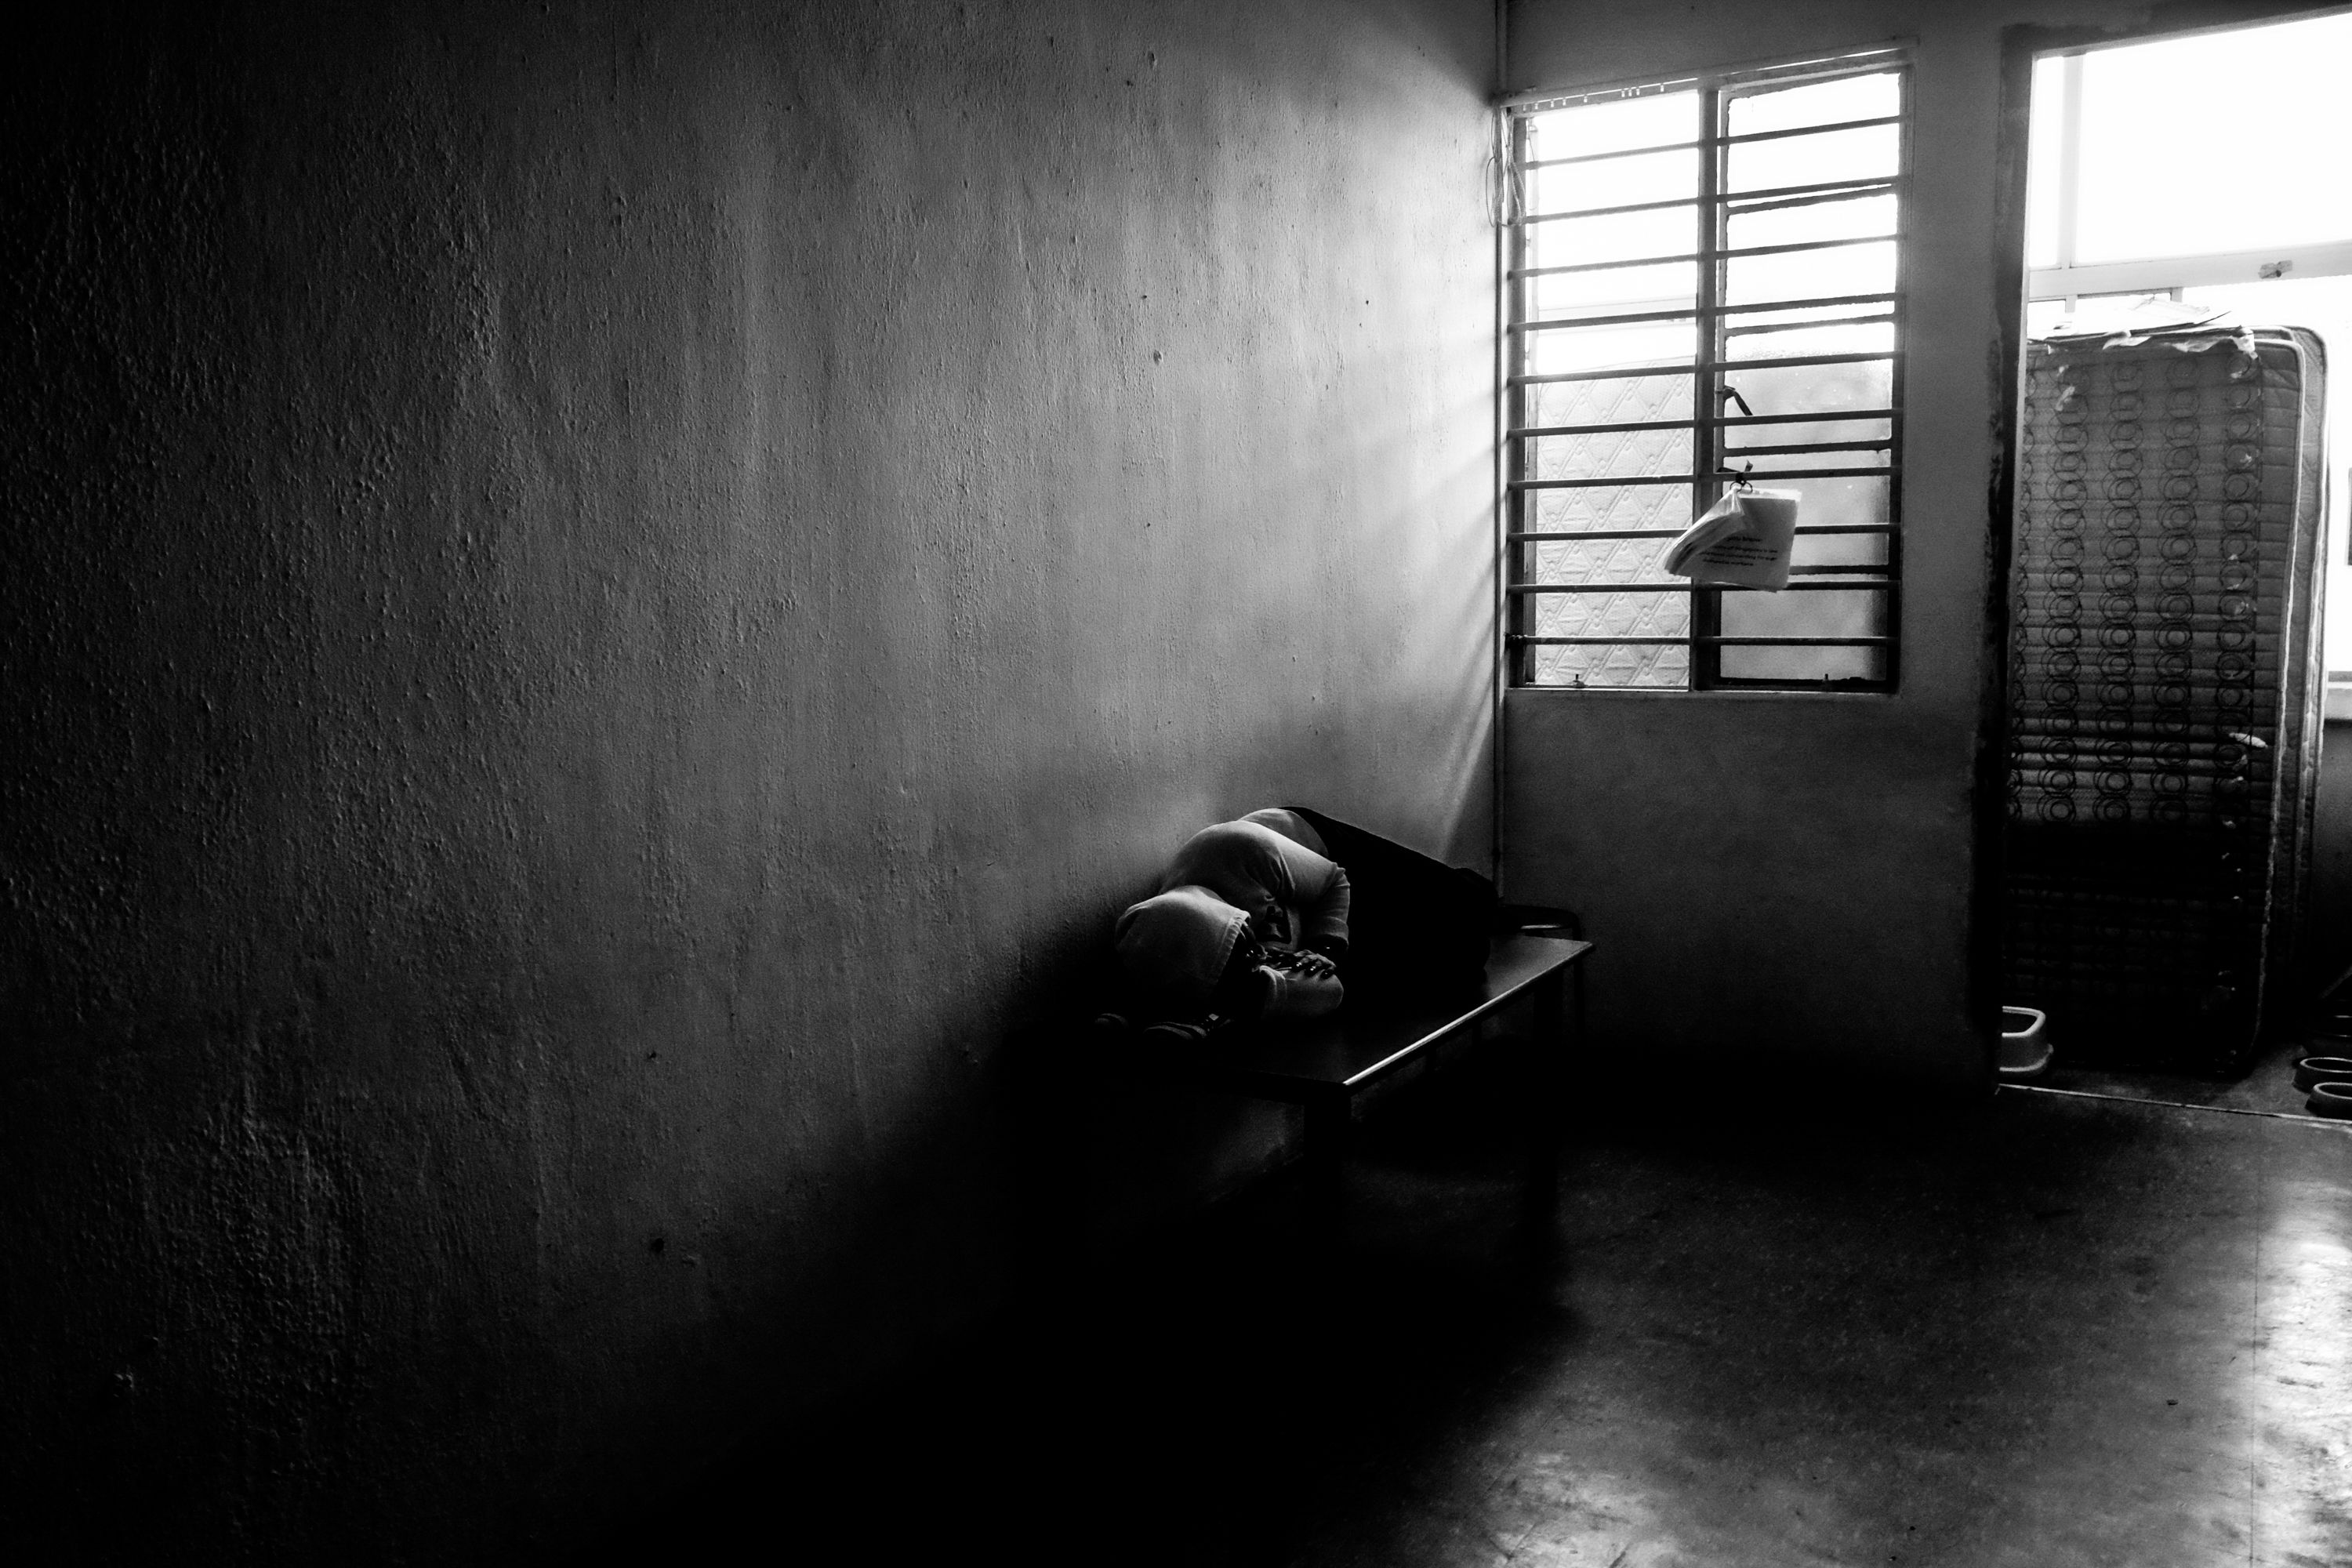 Nutarseh, 45, is a domestic worker from Indonesia. She suffers from memory loss and the shelter is investigating the cause of her condition. An Indonesian volunteer in the shelter told the photographer that Nutarseh’s employer left her on the streets until the police found her. She is now back in her home country. Image by Xyza Bacani. Singapore, 2016.